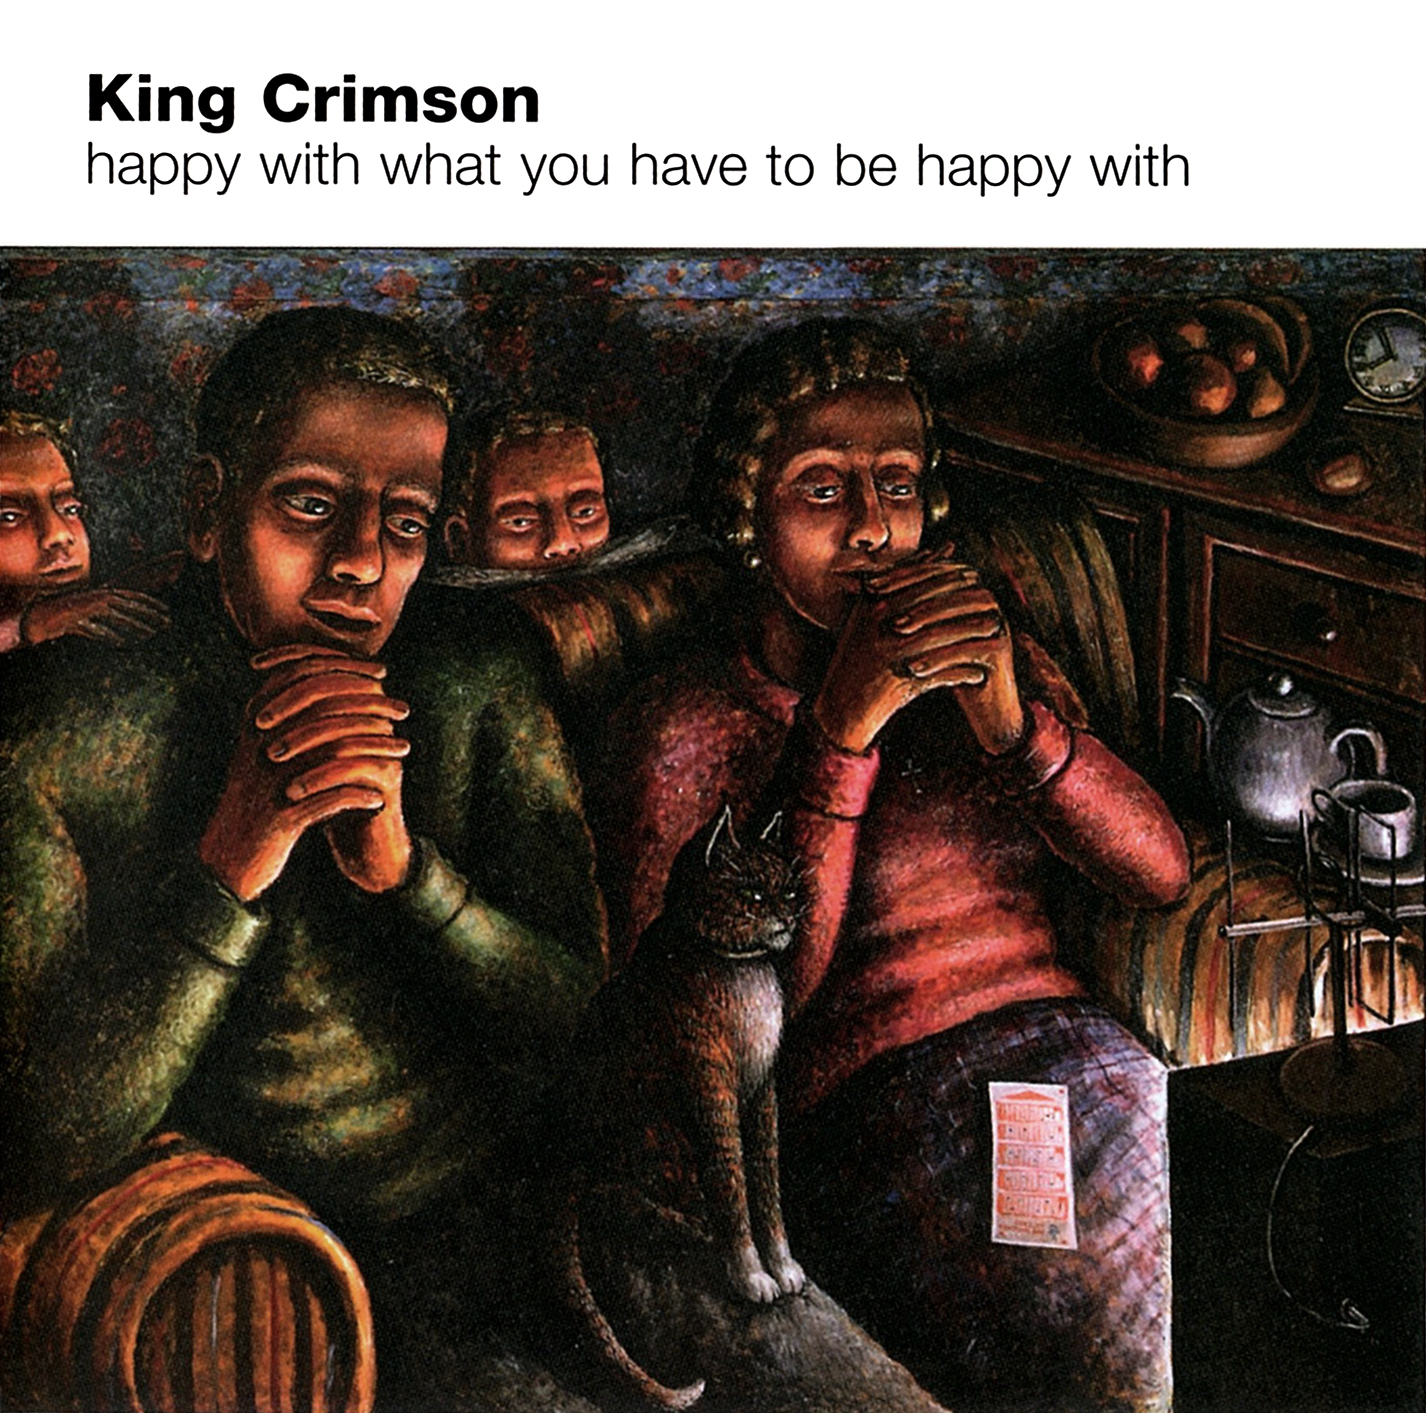 KING CRIMSON (キング・クリムゾン) ミニ・アルバム『happy with what you have to be happy with (ハッピー・ウィズ・ホワット・ユー・ハヴ・トゥ・ビー・ハッピー・ウィズ)』(2002年10月8日発売) 高画質CDジャケット画像